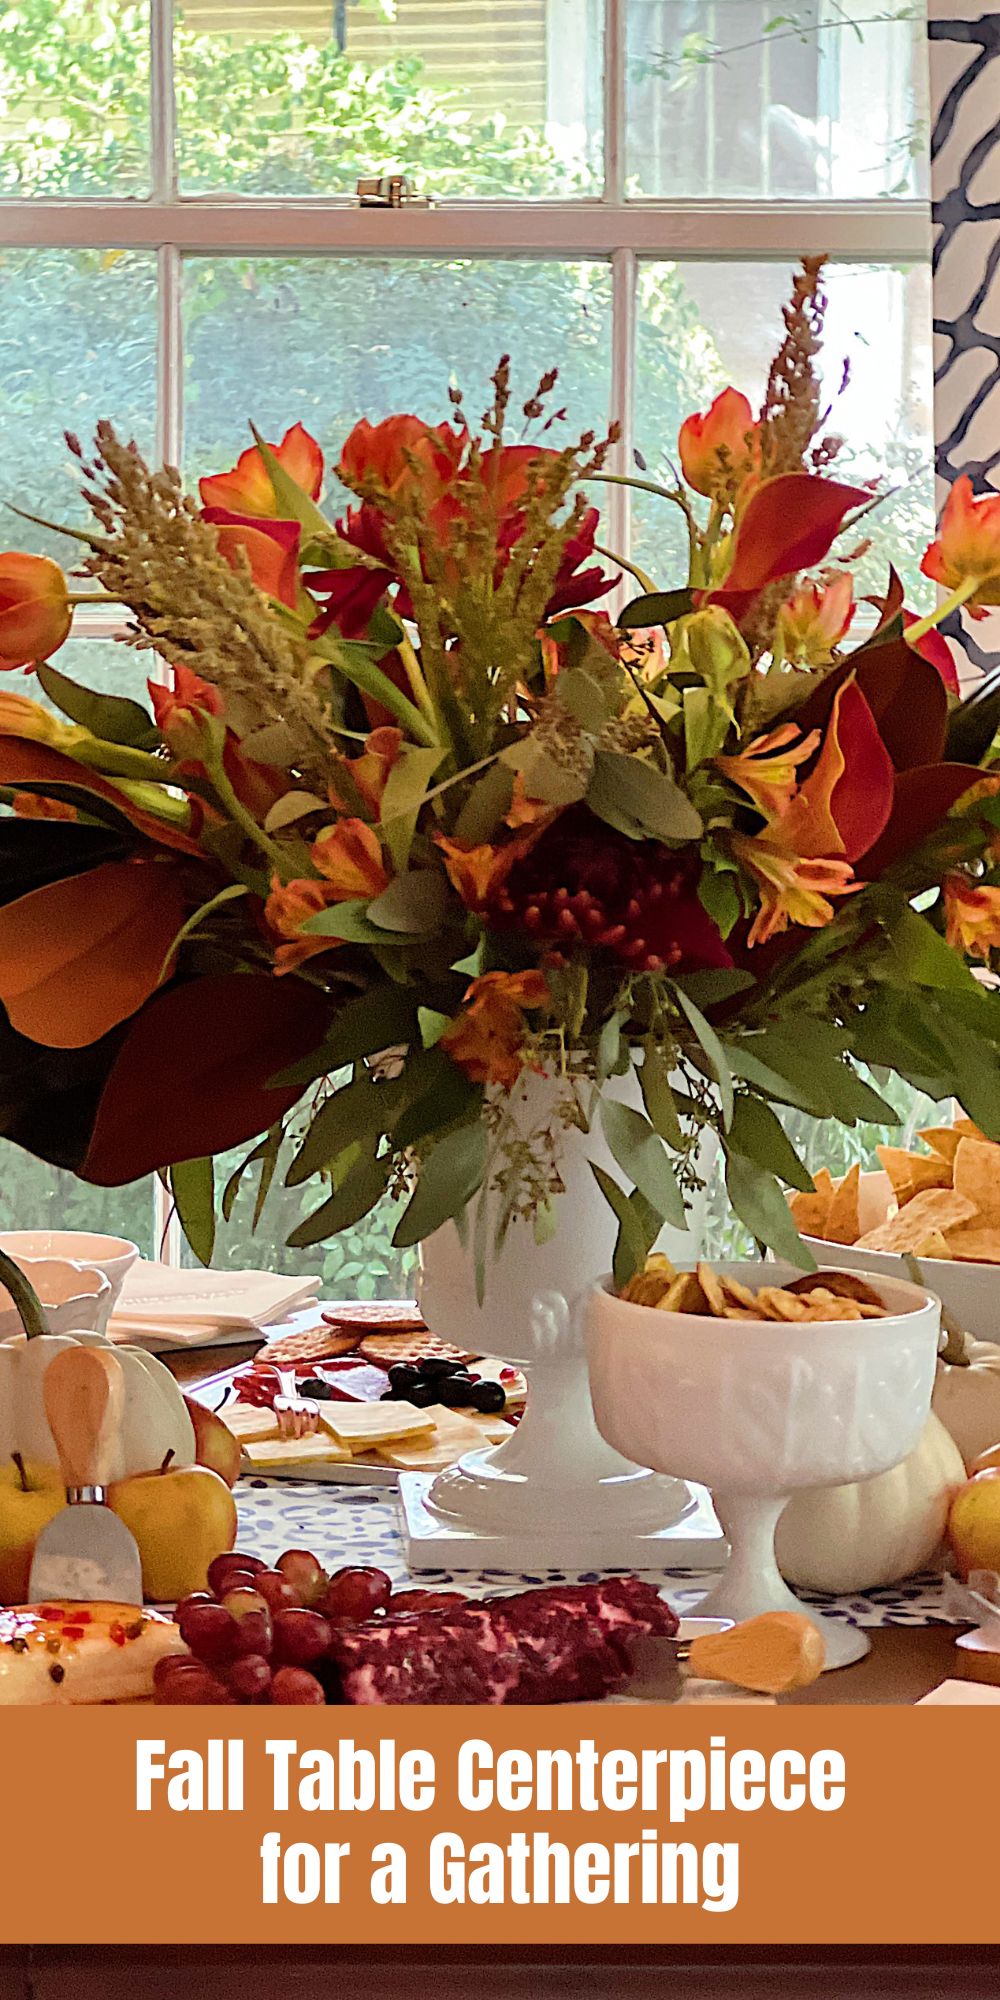 I was so fortunate to have held a book signing at my friend KariAnne's home and I wanted to share the Fall Table Centerpiece for our Gathering.